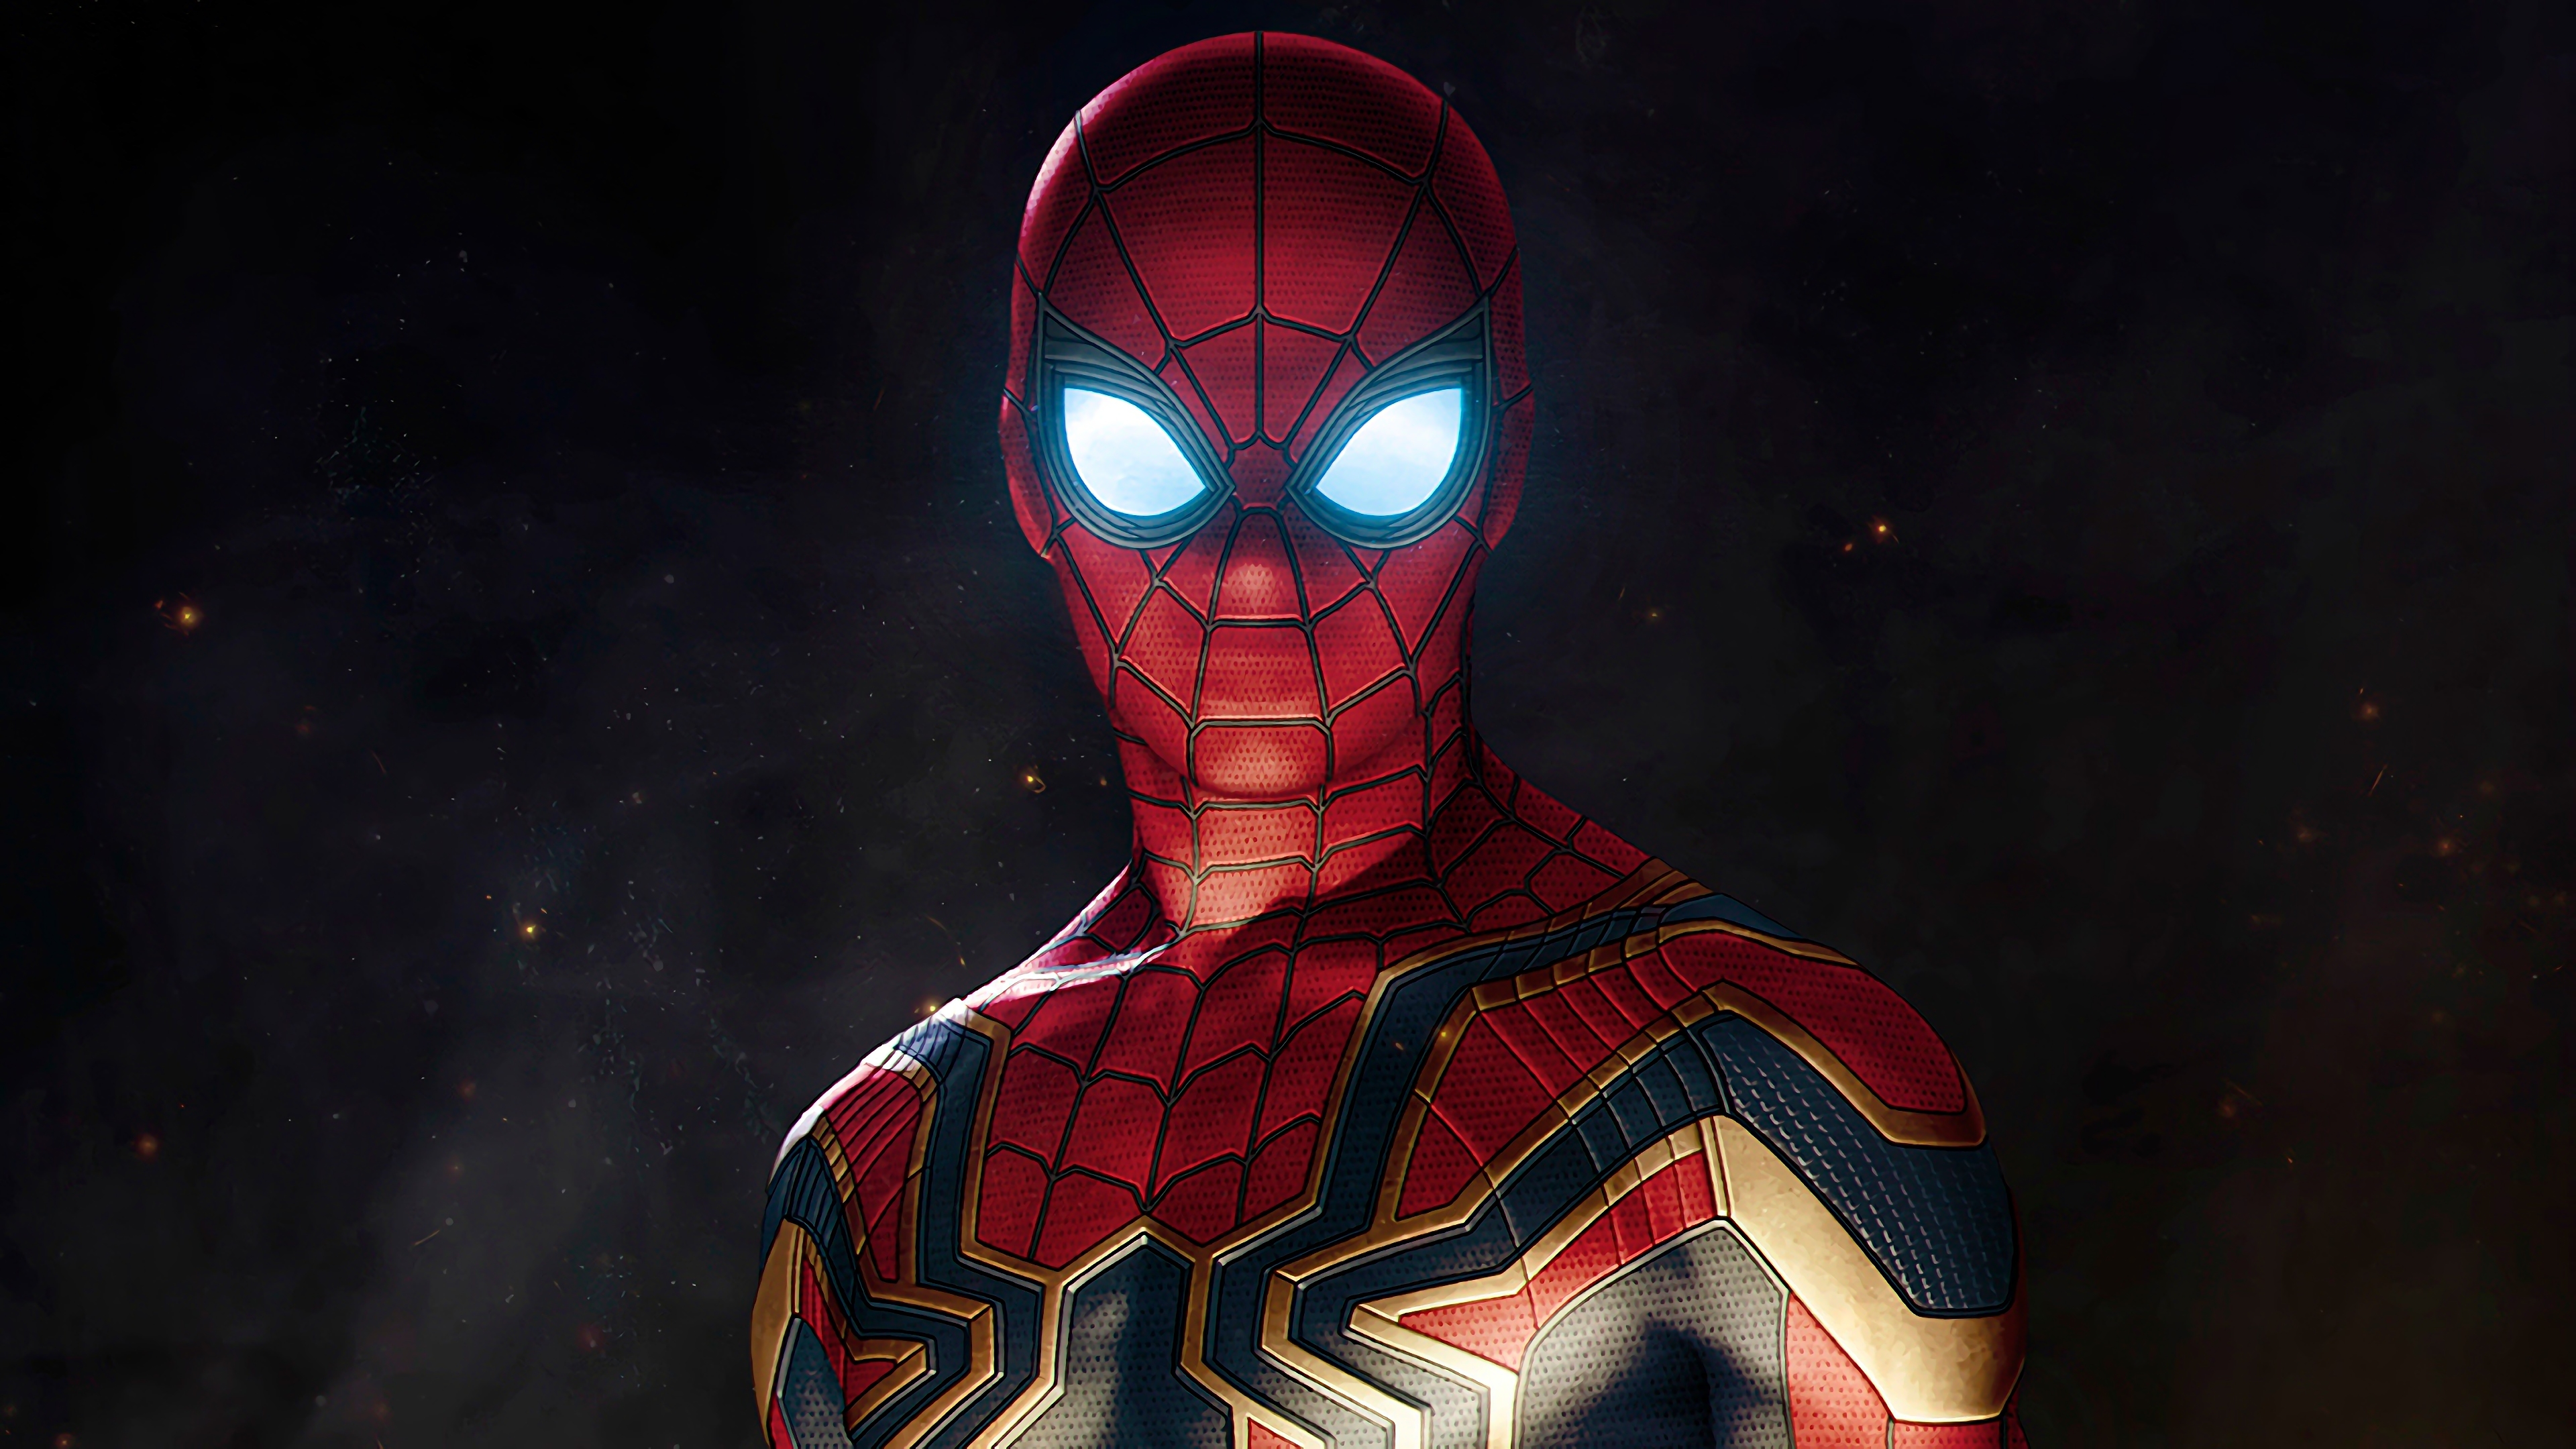 spider man, movie, avengers: infinity war, peter parker, glowing eyes, the avengers wallpaper for mobile